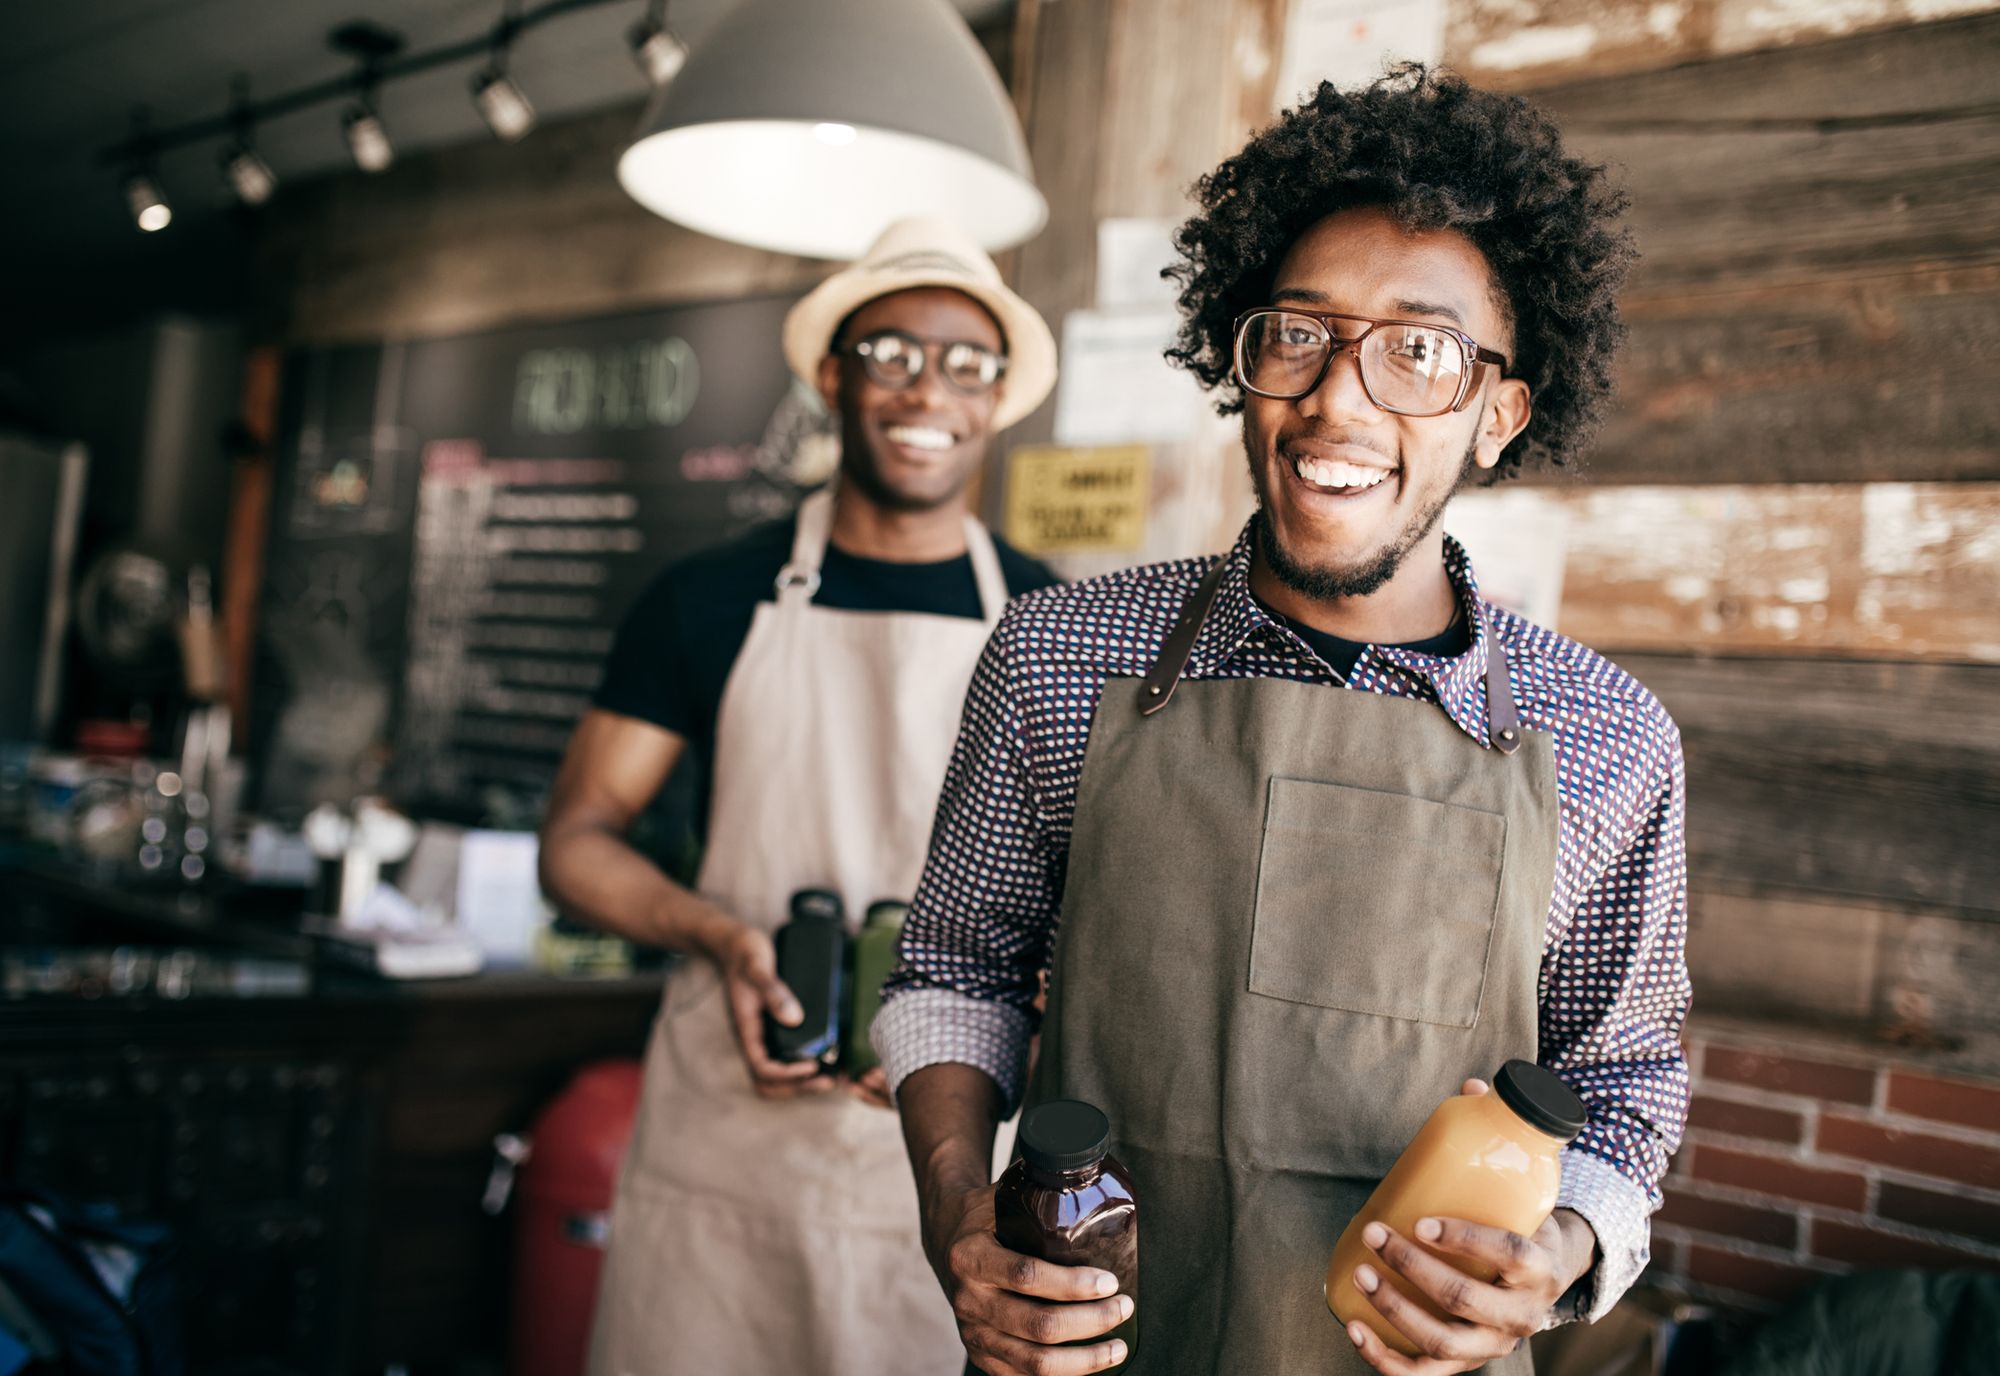 #BuyBlack: 15 Black-owned coffee shops you should visit